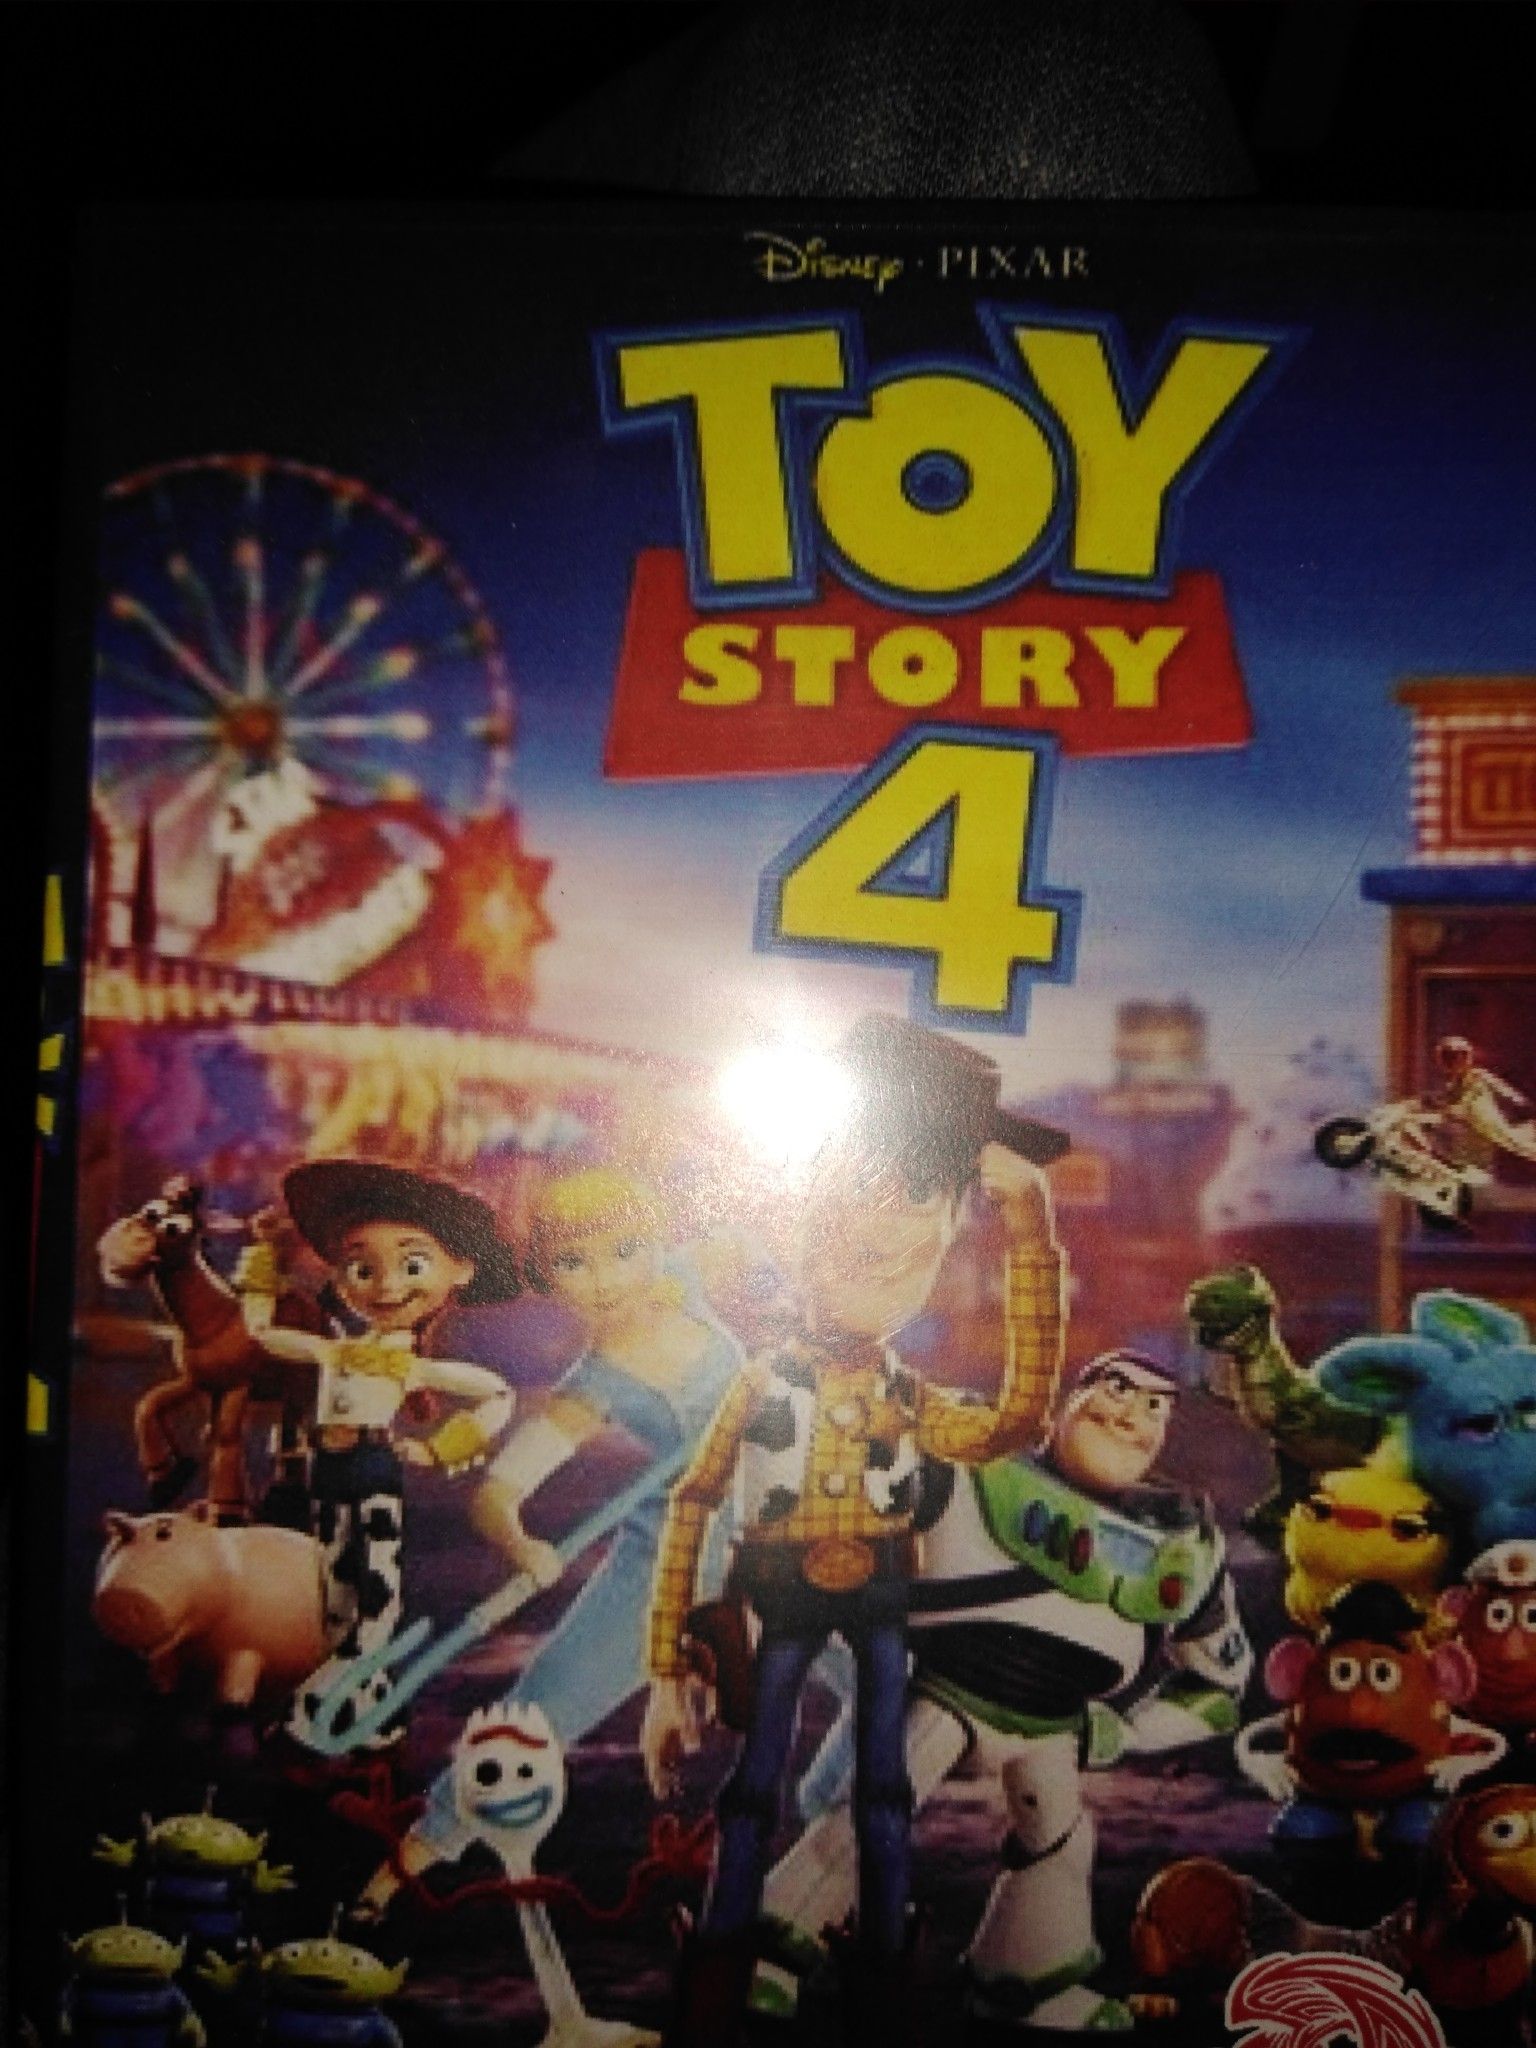 Toy Story 4 DVD